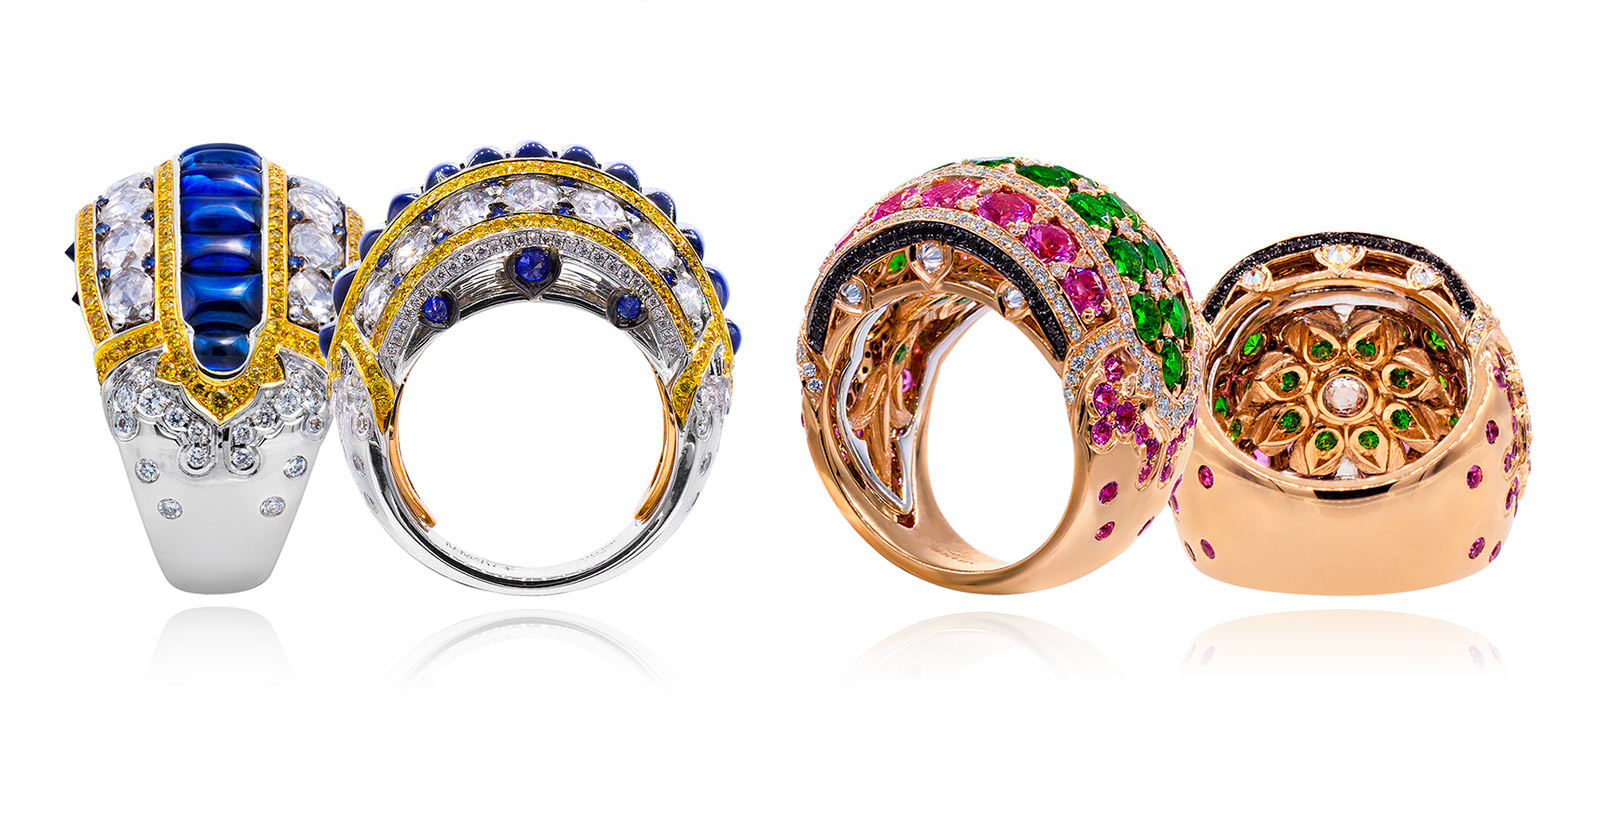 Alessio Boschi Peacock Dance rings in white an rose gold with coloured gemstones and diamonds